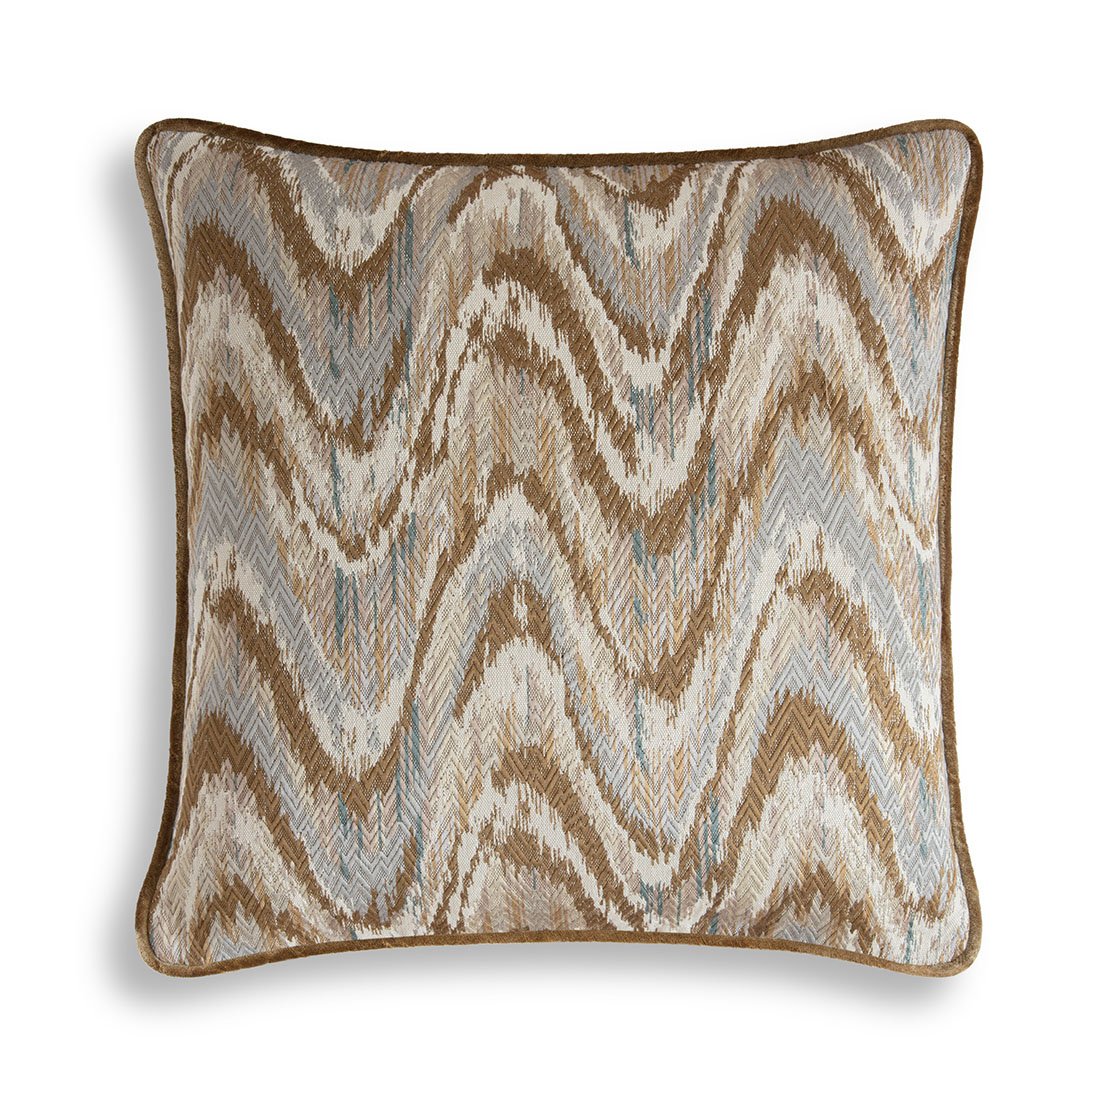 Kyma cushion - Driftwood backed and piped in Capri silk velvet - French grey - Beaumont & Fletcher